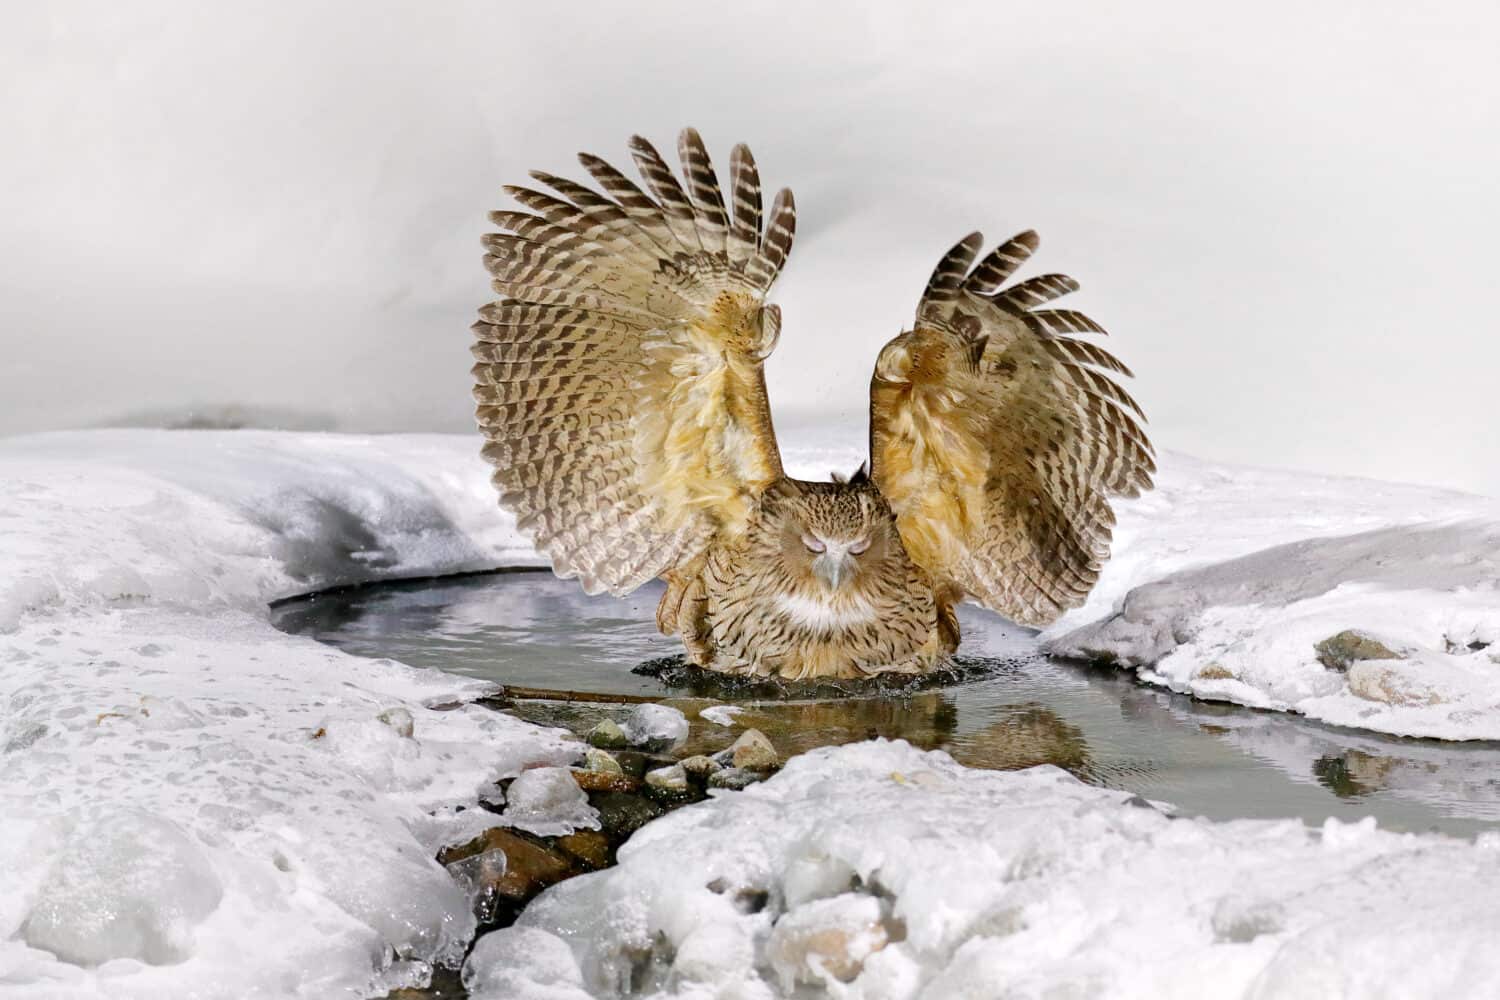 Japan Owl hunting in cold water. Wildlife scene from winter in Hokkaido, Japan. River bird with open wings. Blakiston's fish owl, Bubo blakistoni, largest living species of fish bird.